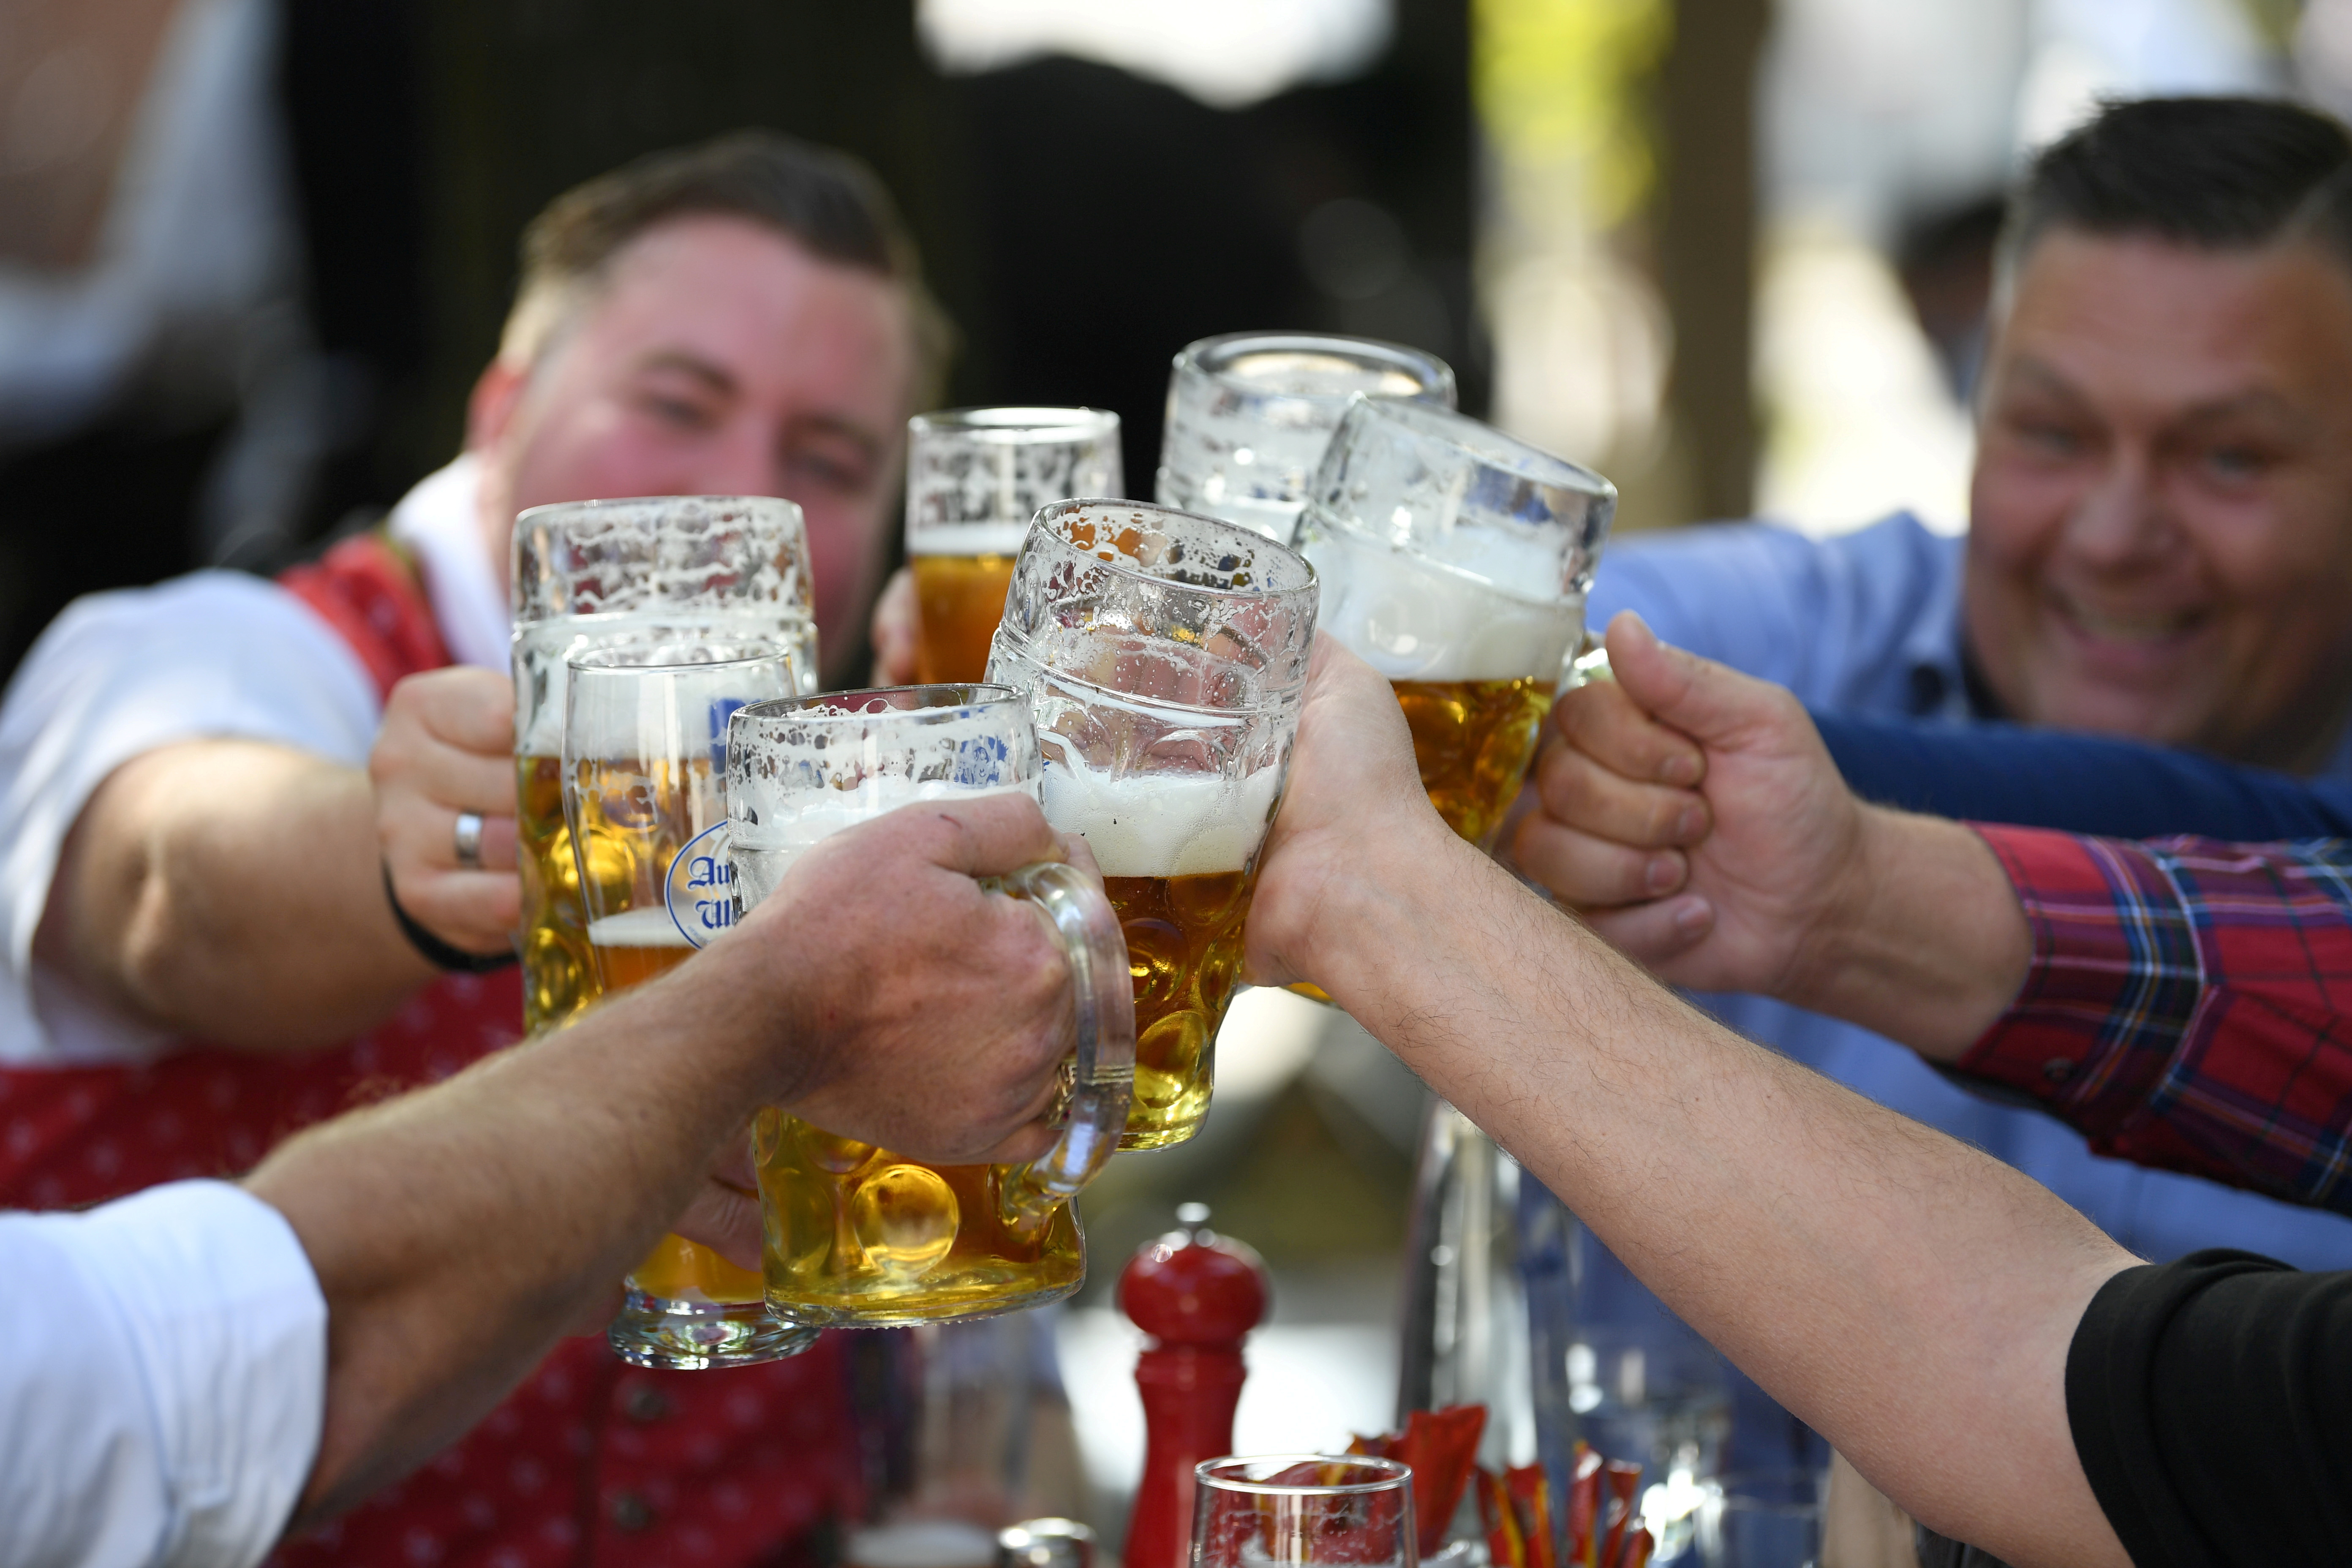 Beer garden guests salute near Theresienwiese where Oktoberfest would have started